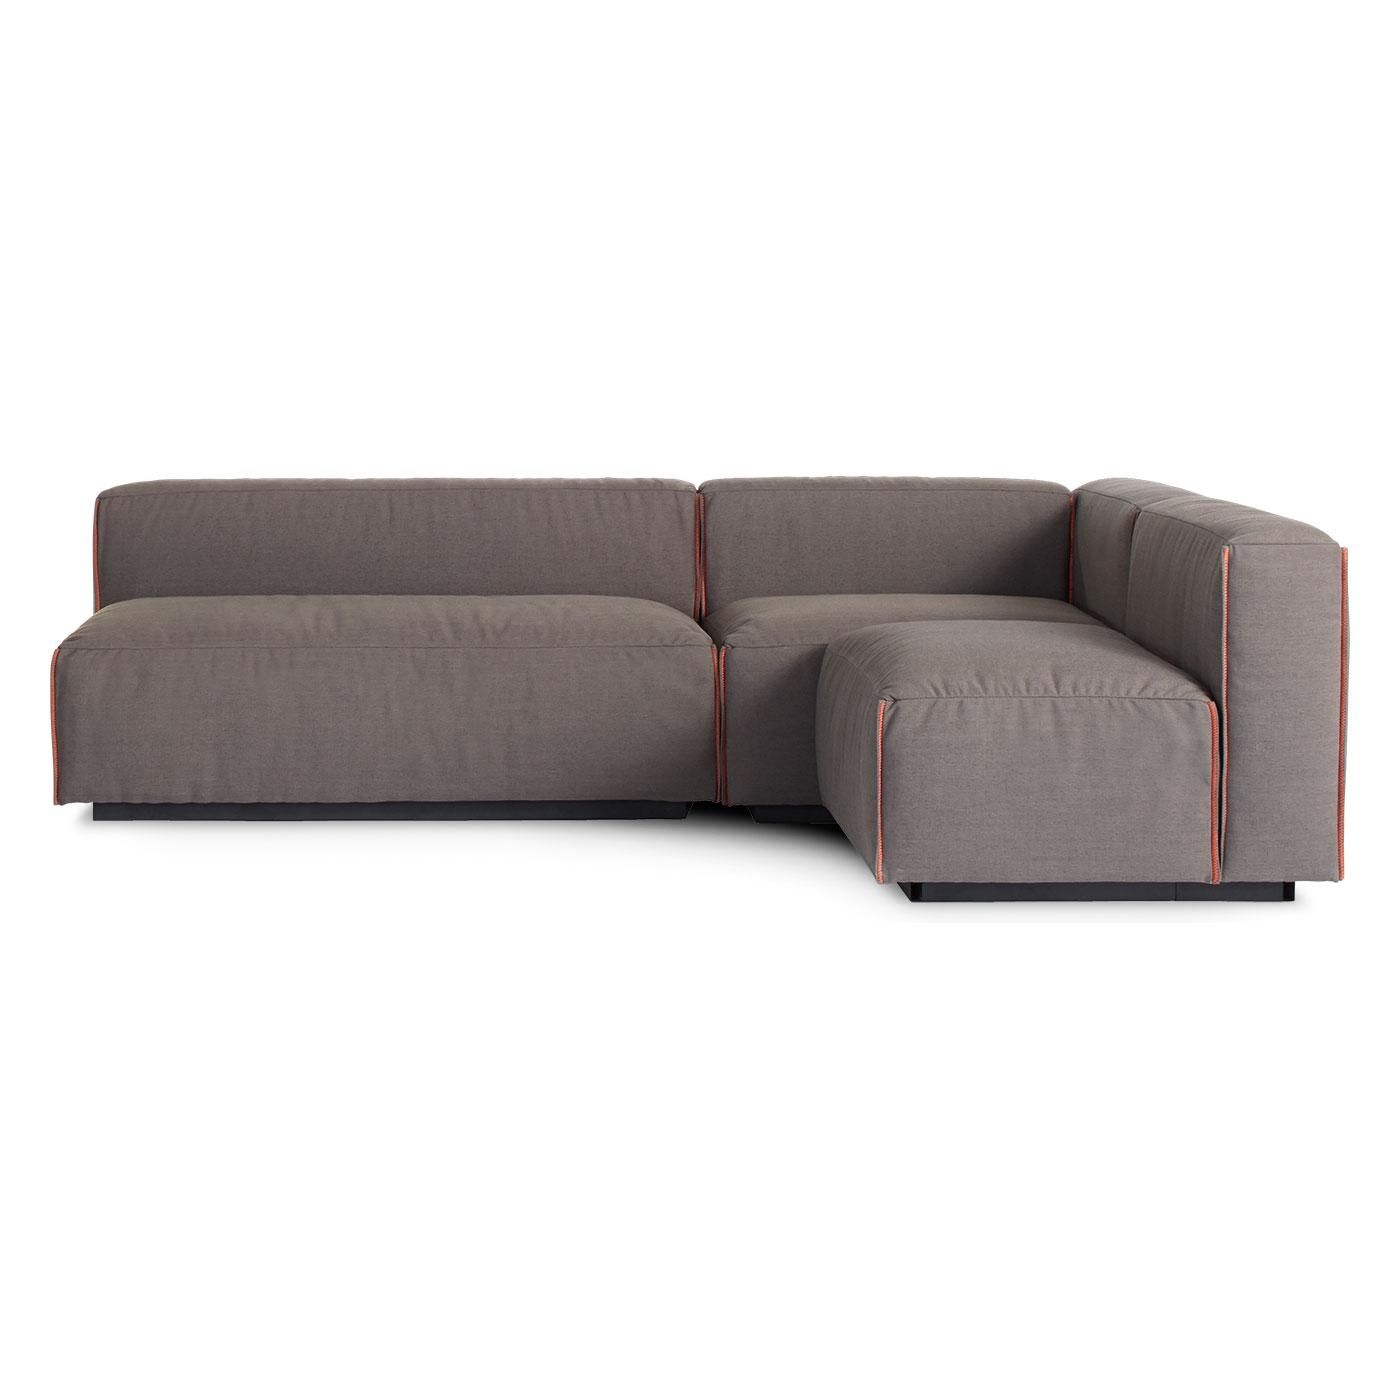 Cleon Medium Sectional – Armless Sectional | Blu Dot Inside Armless Sectional Sofas (View 7 of 15)